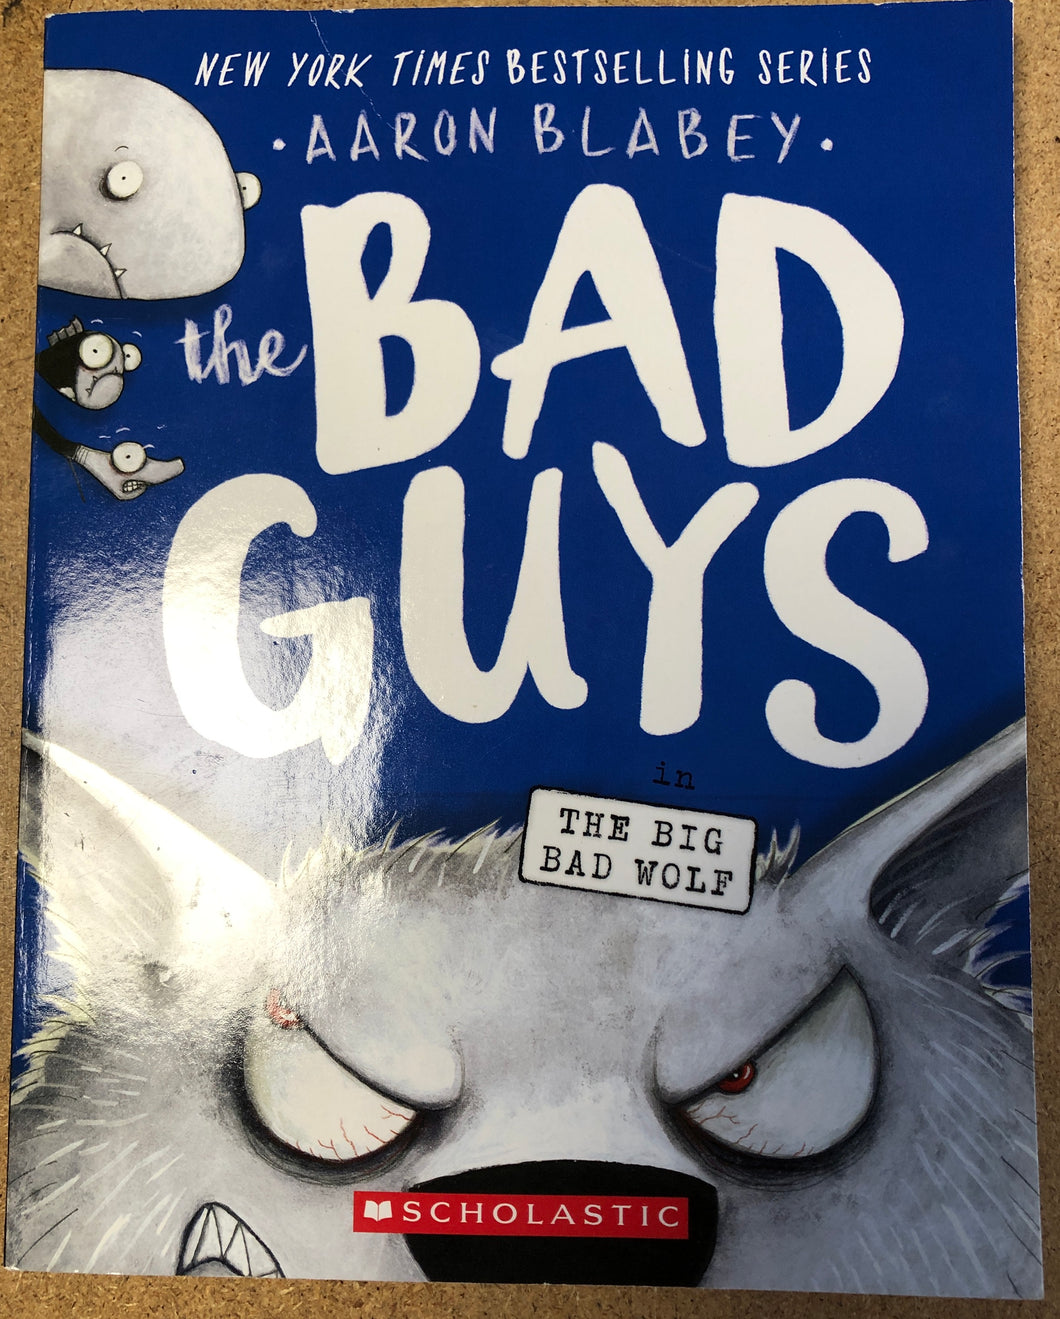 THE BAD GUYS #9: THE BIG BAD WOLF BY AARON BLABEY